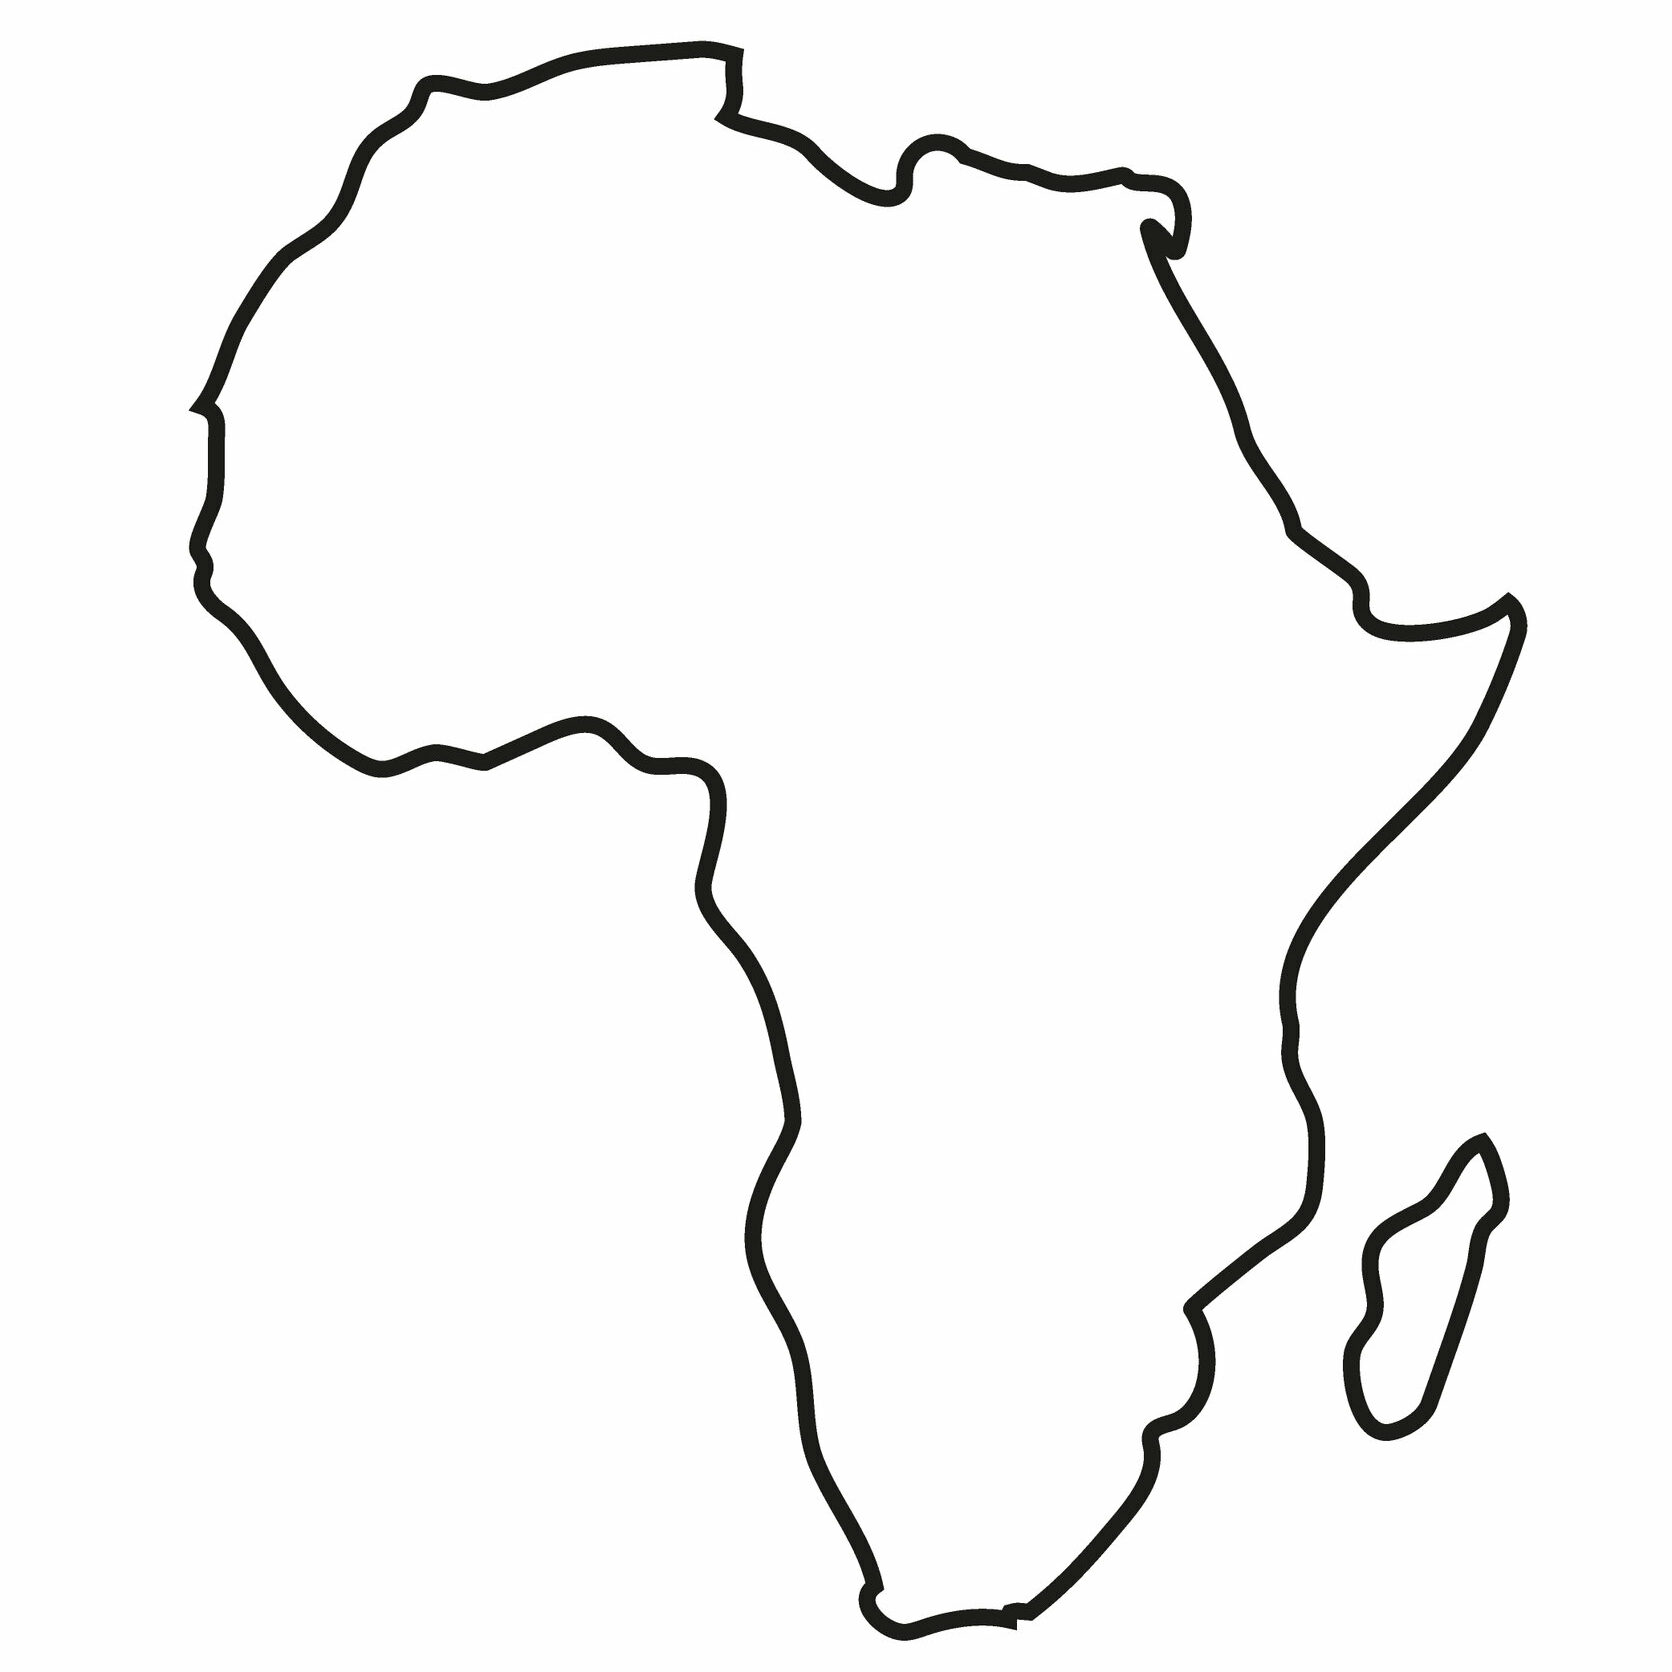 Blank Map Of Africa Printable Outline Pdf 9056